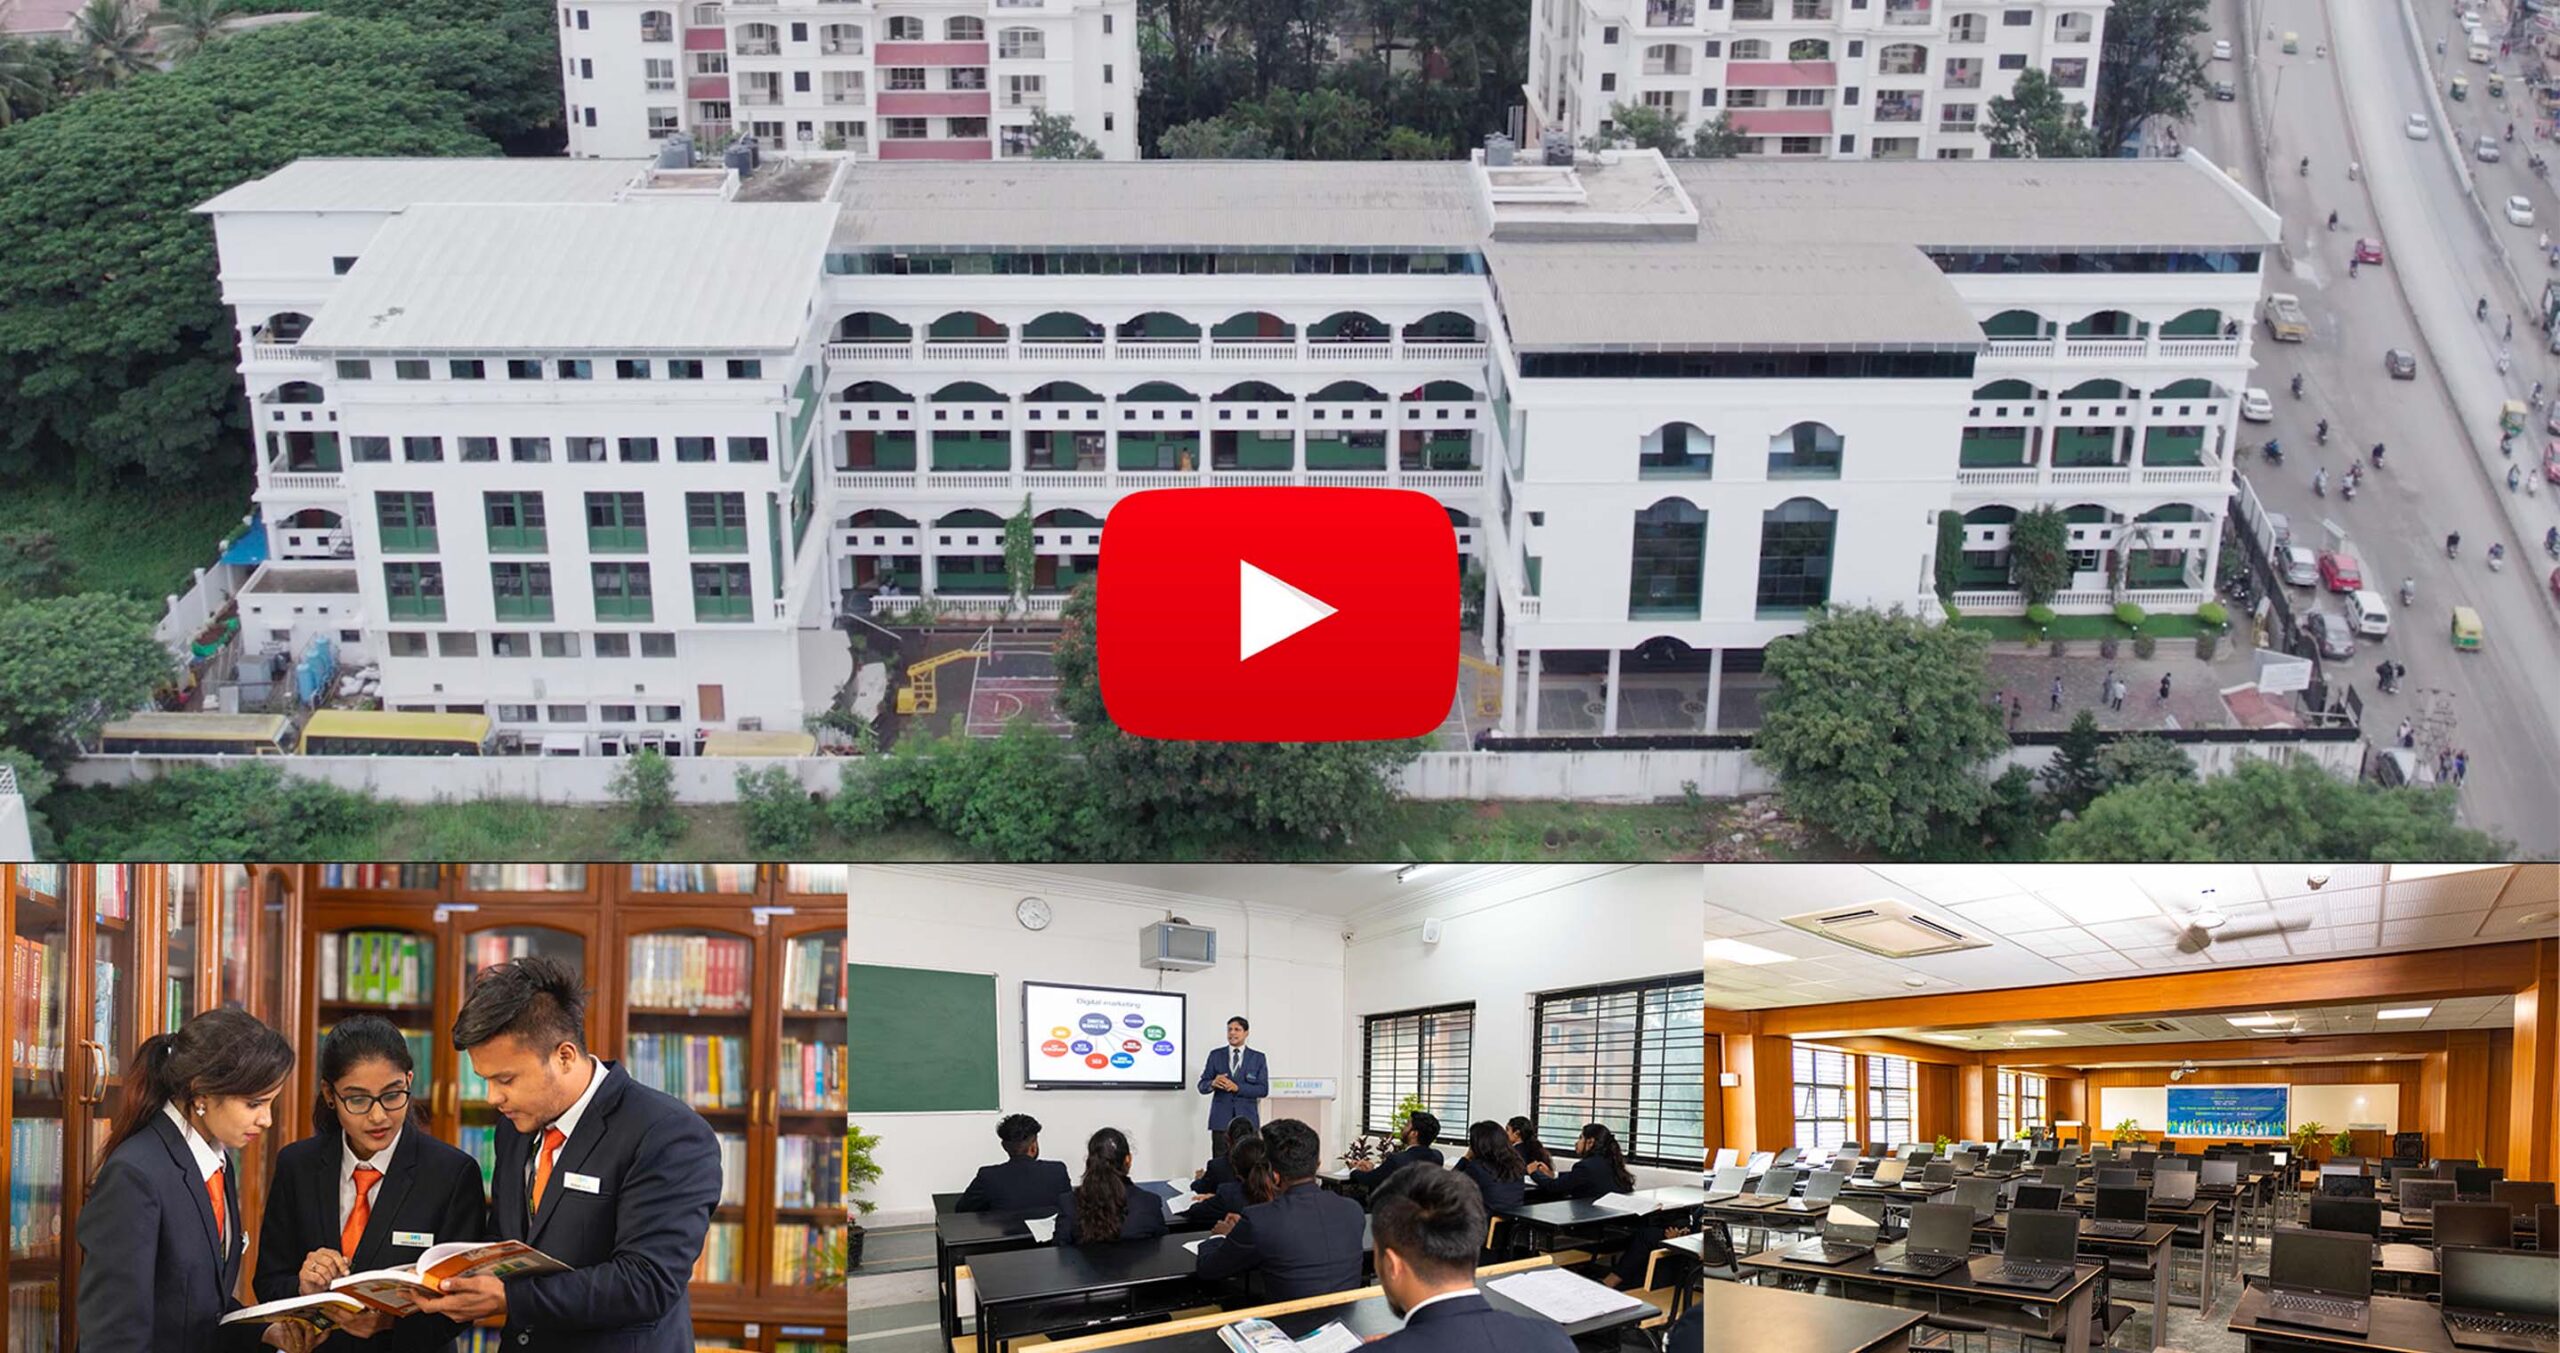 About Us- Image/Indian Academy School Of Management Studies